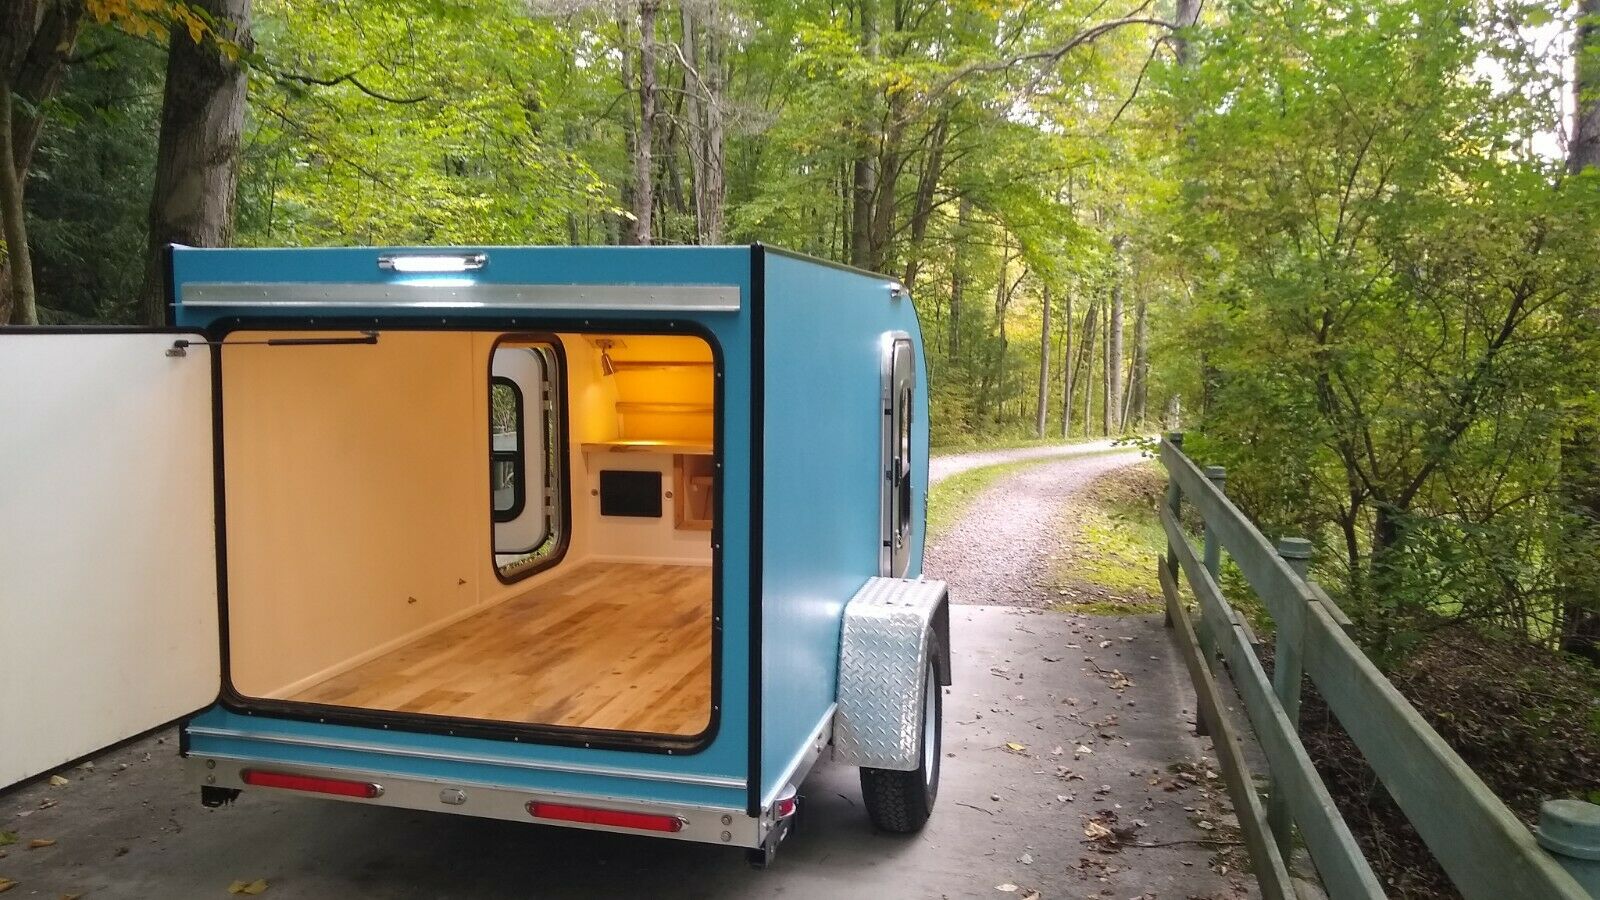 This teardrop trailer is ultra-sturdy and can be customized.